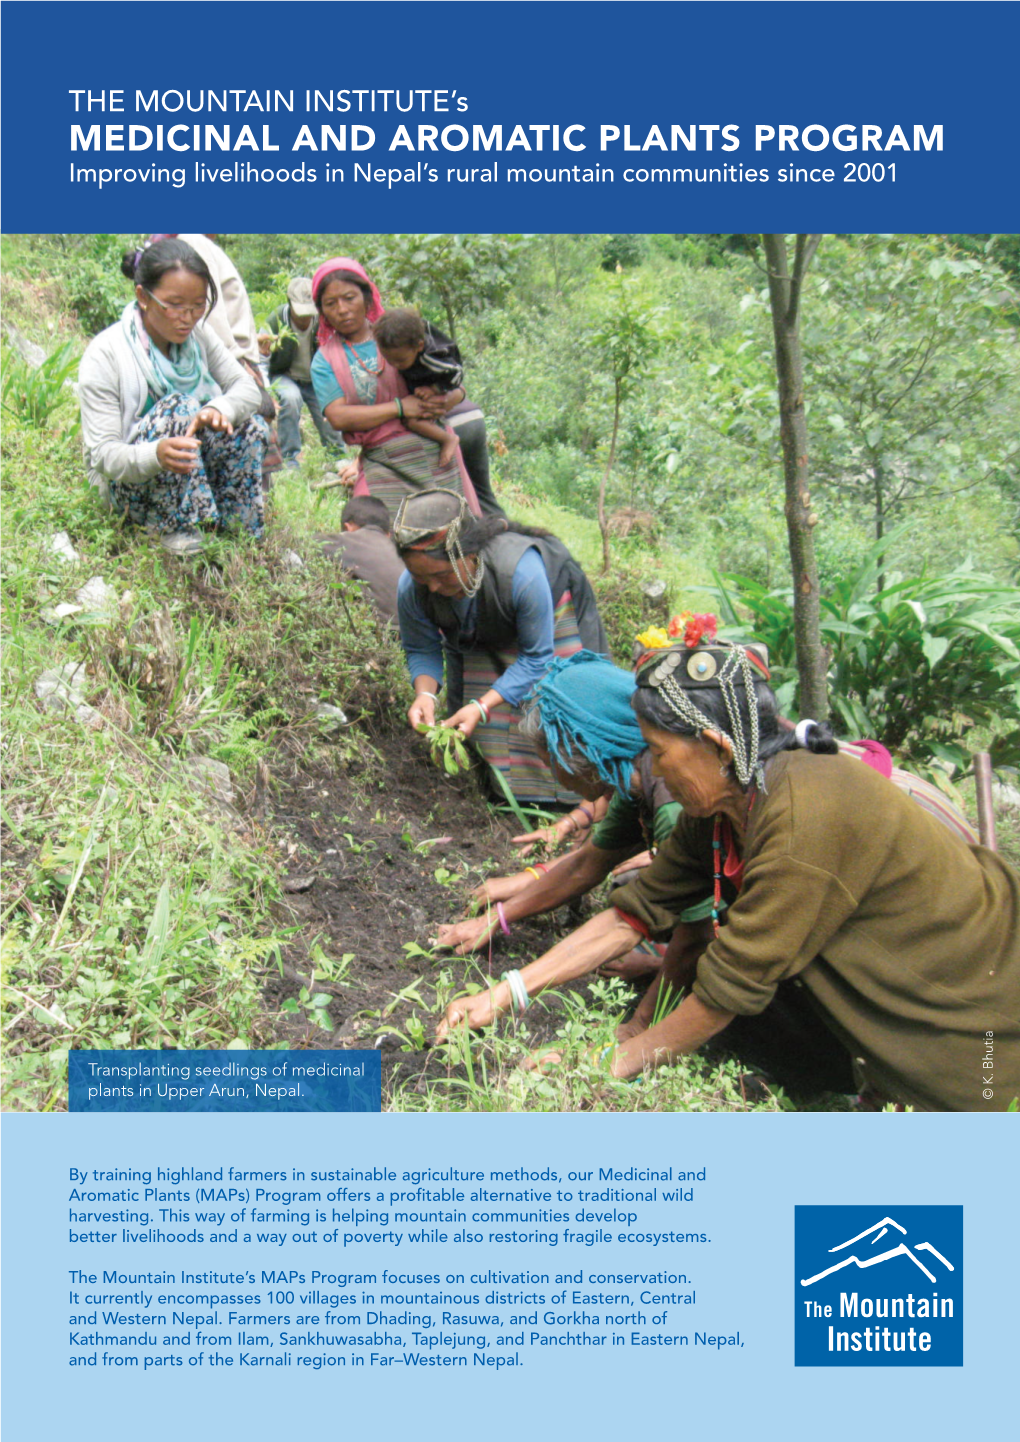 MEDICINAL and AROMATIC PLANTS PROGRAM Improving Livelihoods in Nepal’S Rural Mountain Communities Since 2001